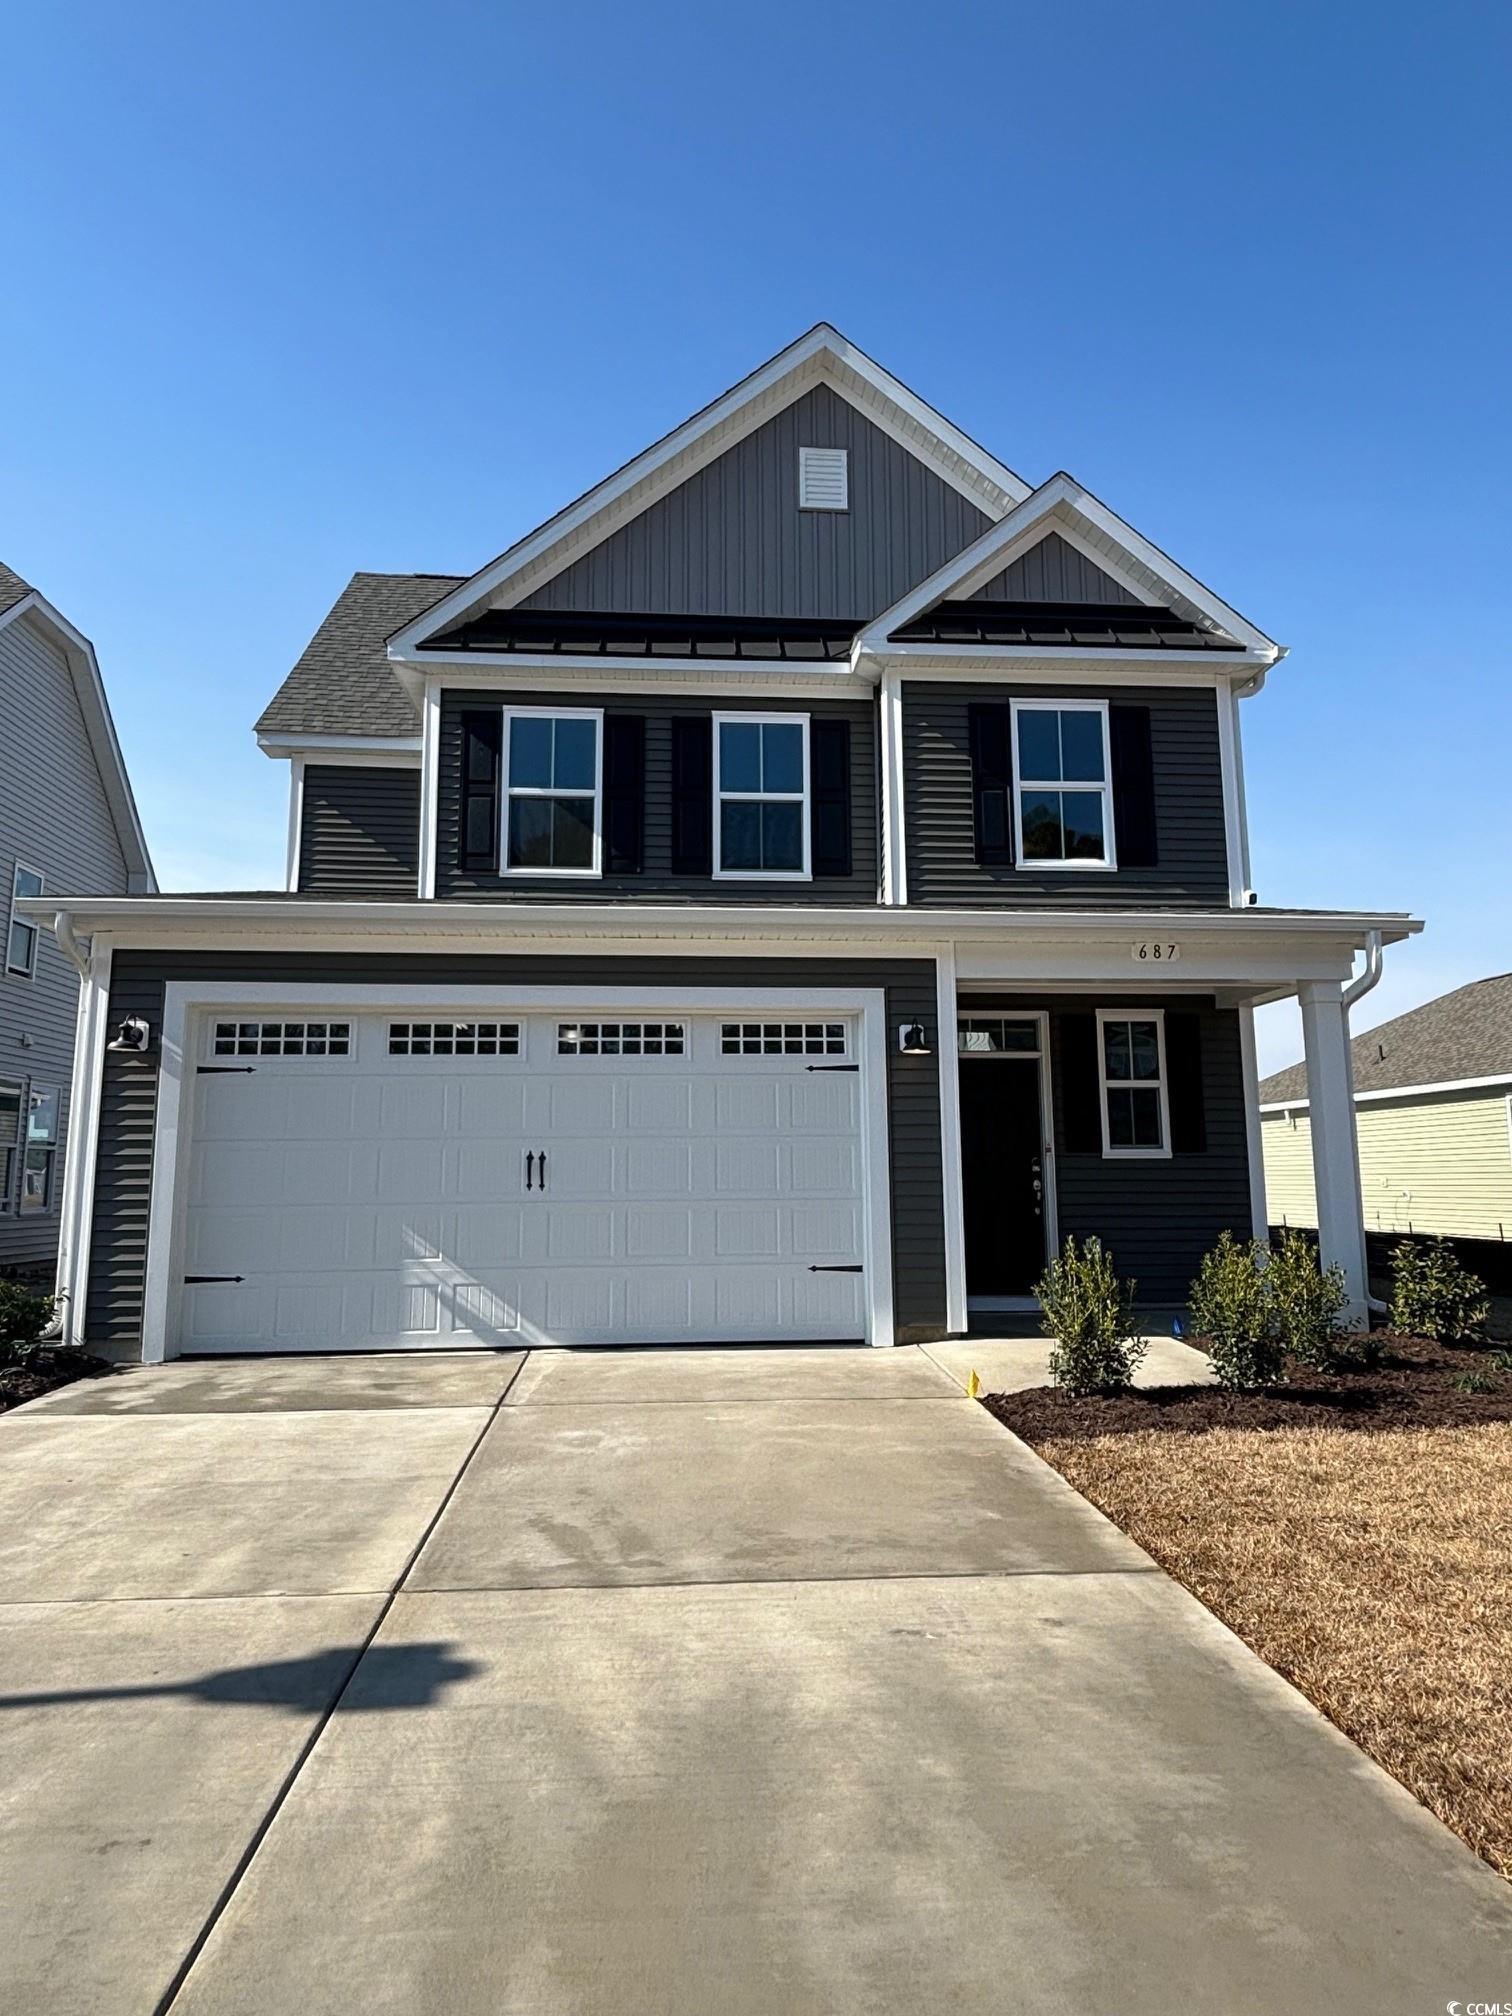 adorable 3 bed, loft, 2.5 bath home. master has 5 ft shower with tile walls. bridgewater homes all have gas heat, cooking, tankless gas water heater, doorbell cameras, digital front door locks and keypad on inside home of home for "smart" features-all that you can access from your phone.